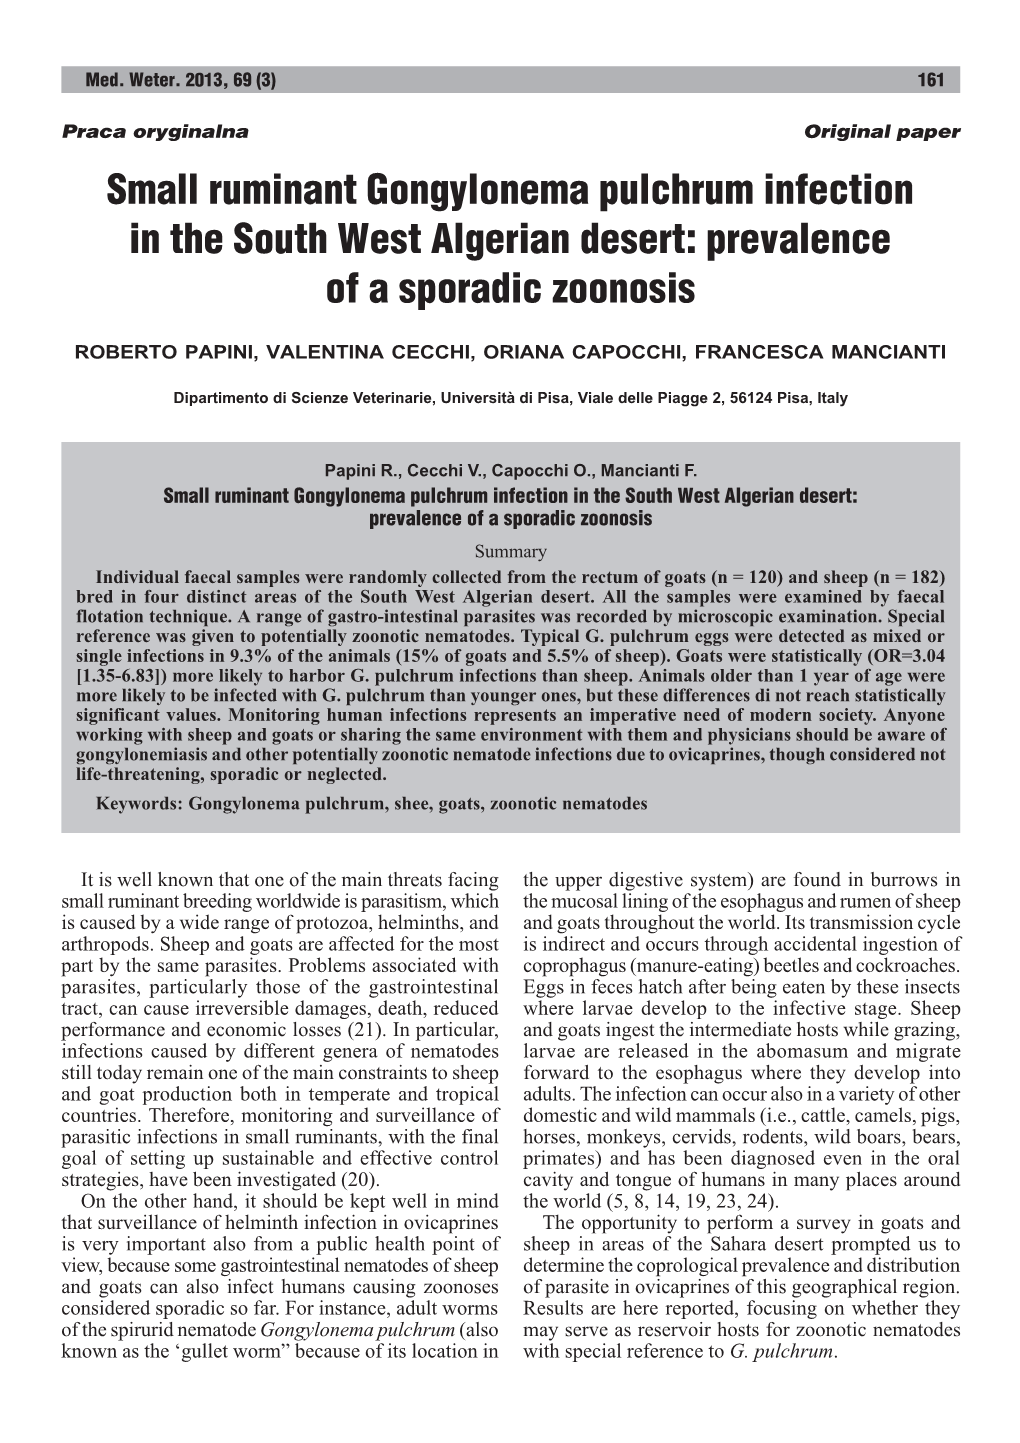 Small Ruminant Gongylonema Pulchrum Infection in the South West Algerian Desert: Prevalence of a Sporadic Zoonosis